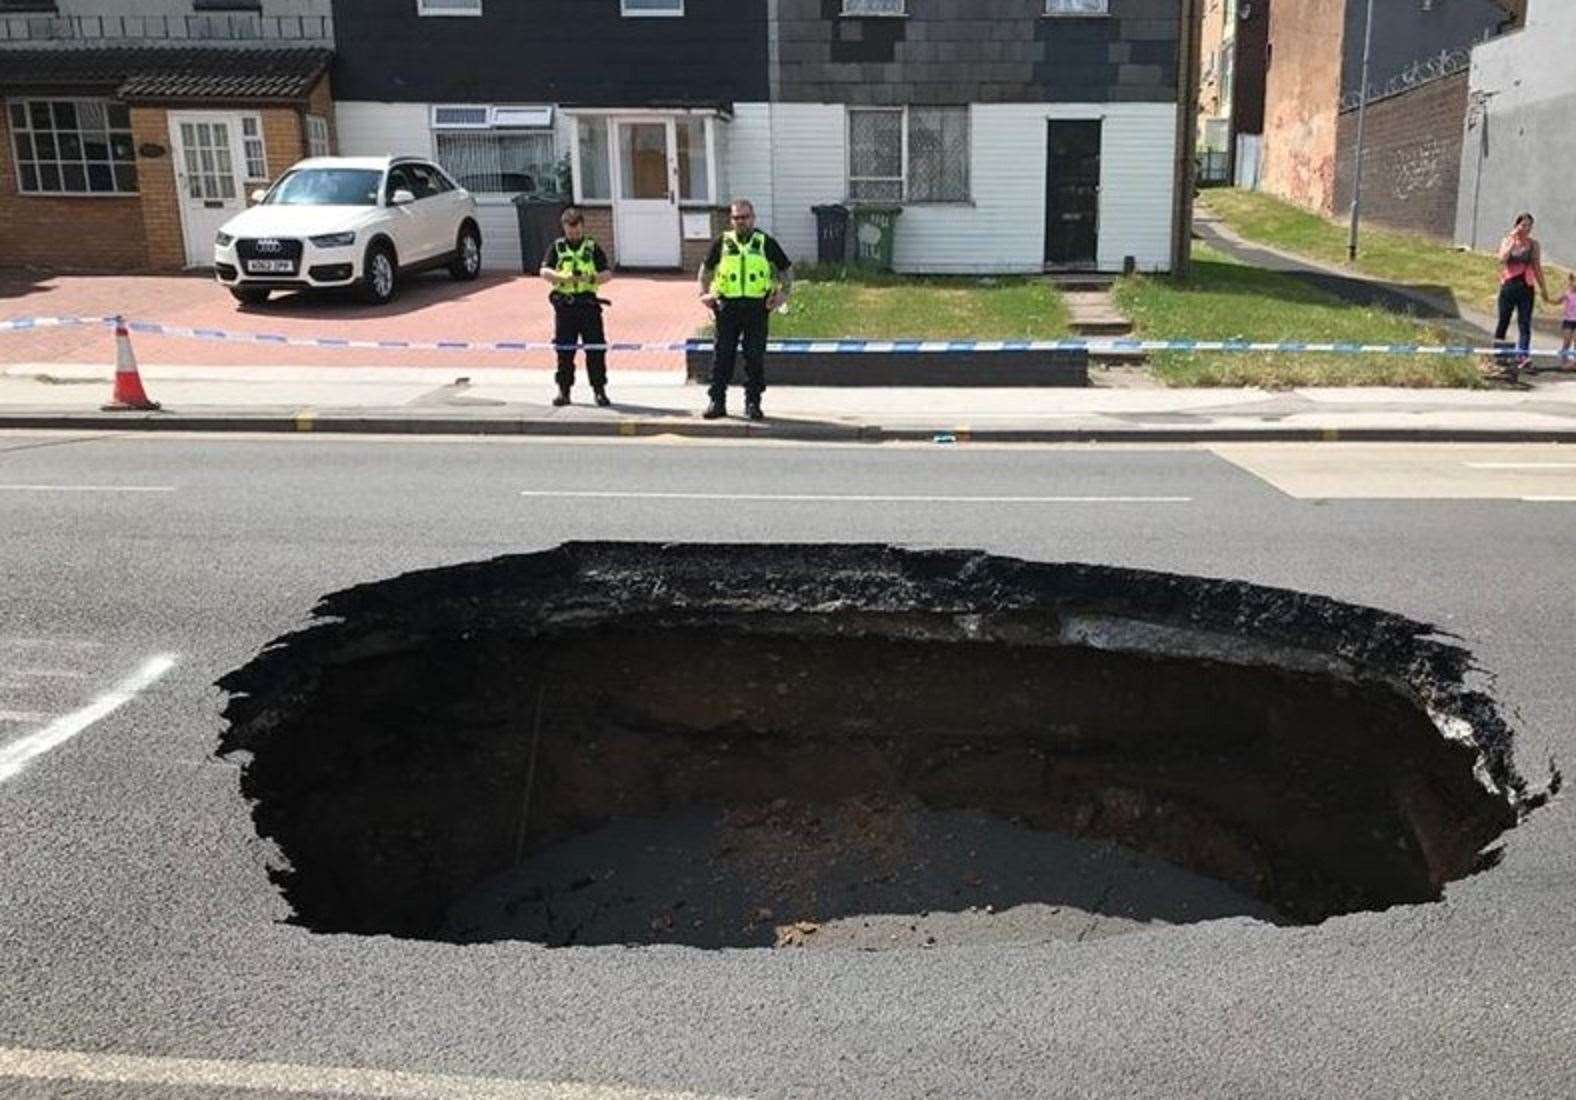 The sinkhole is four metres (13ft) wide and three metres (10ft) deep (Walsall Council/PA)